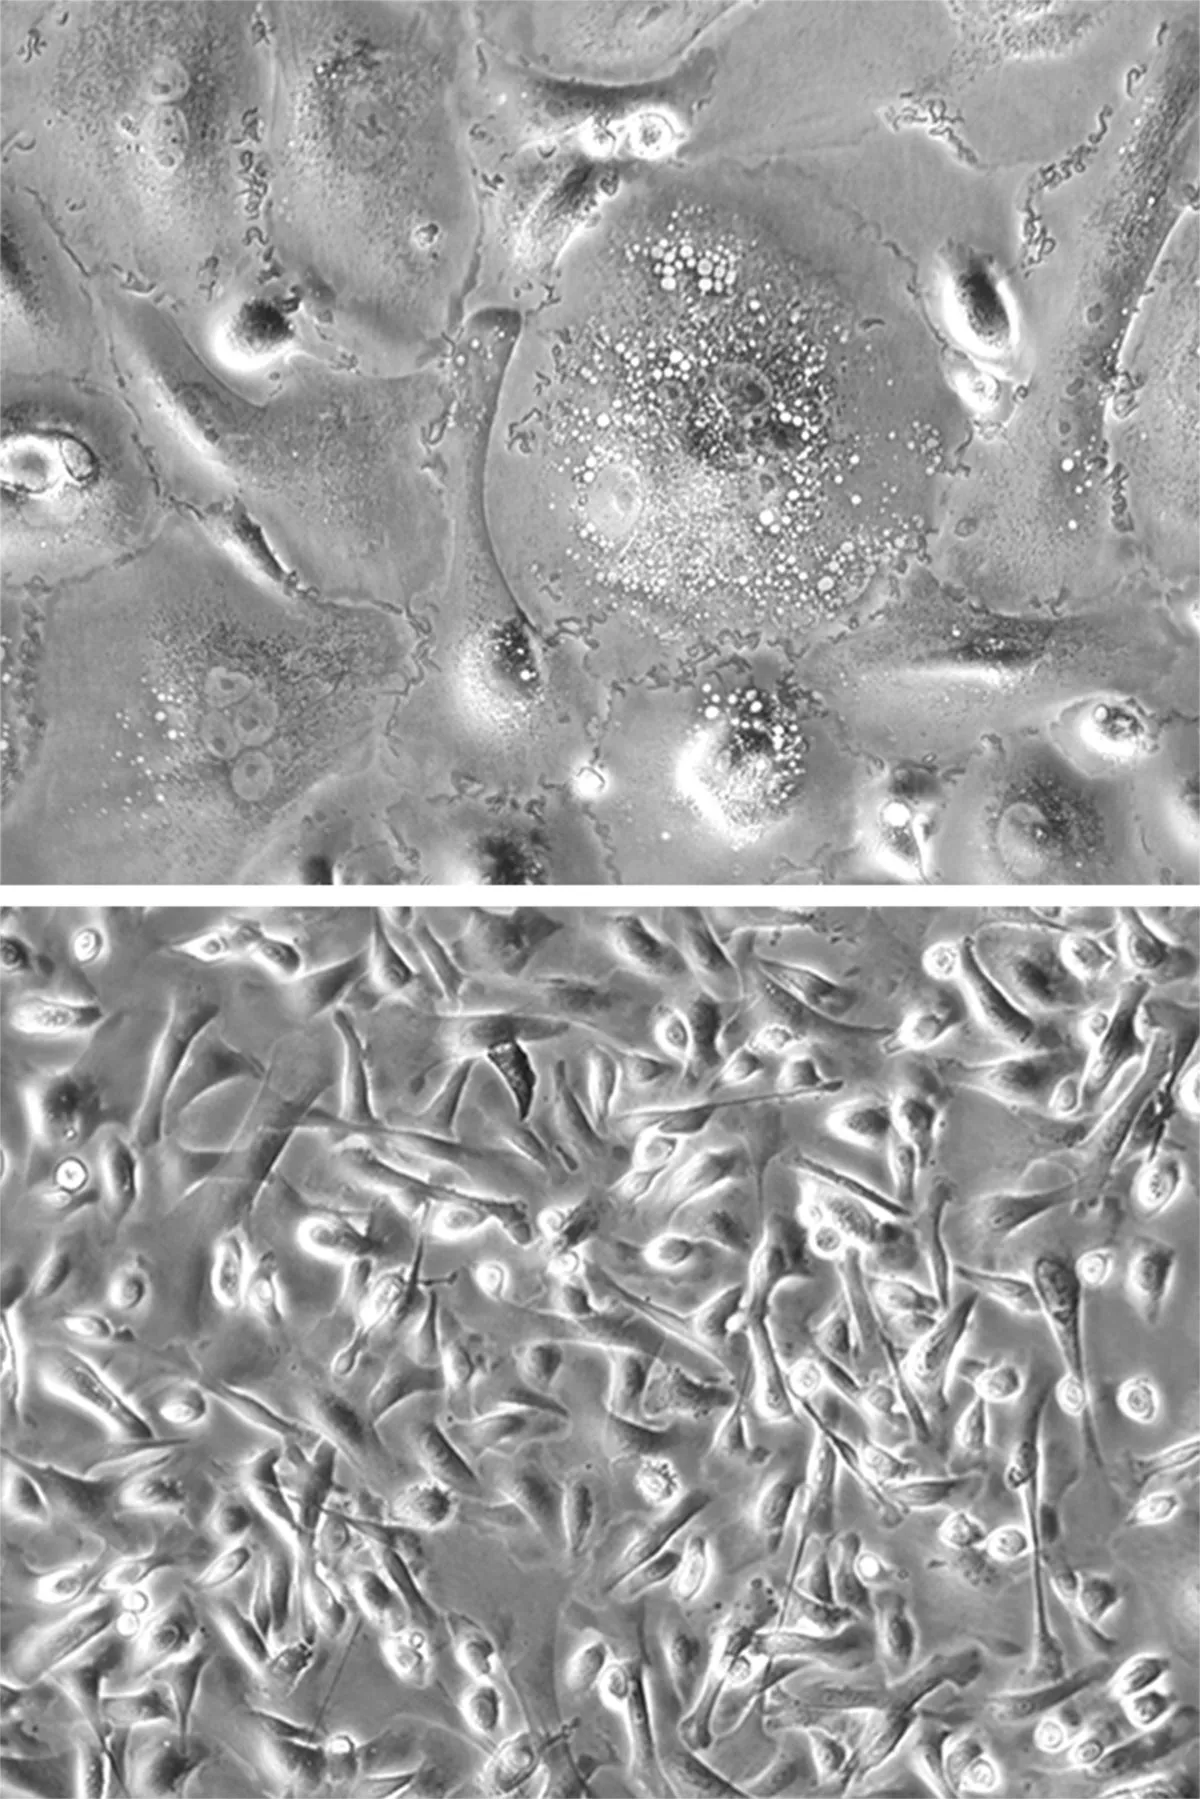 The different proliferations of keratinocytes, a type of skin cell, in an old mouse (top) and a young mouse (bottom)